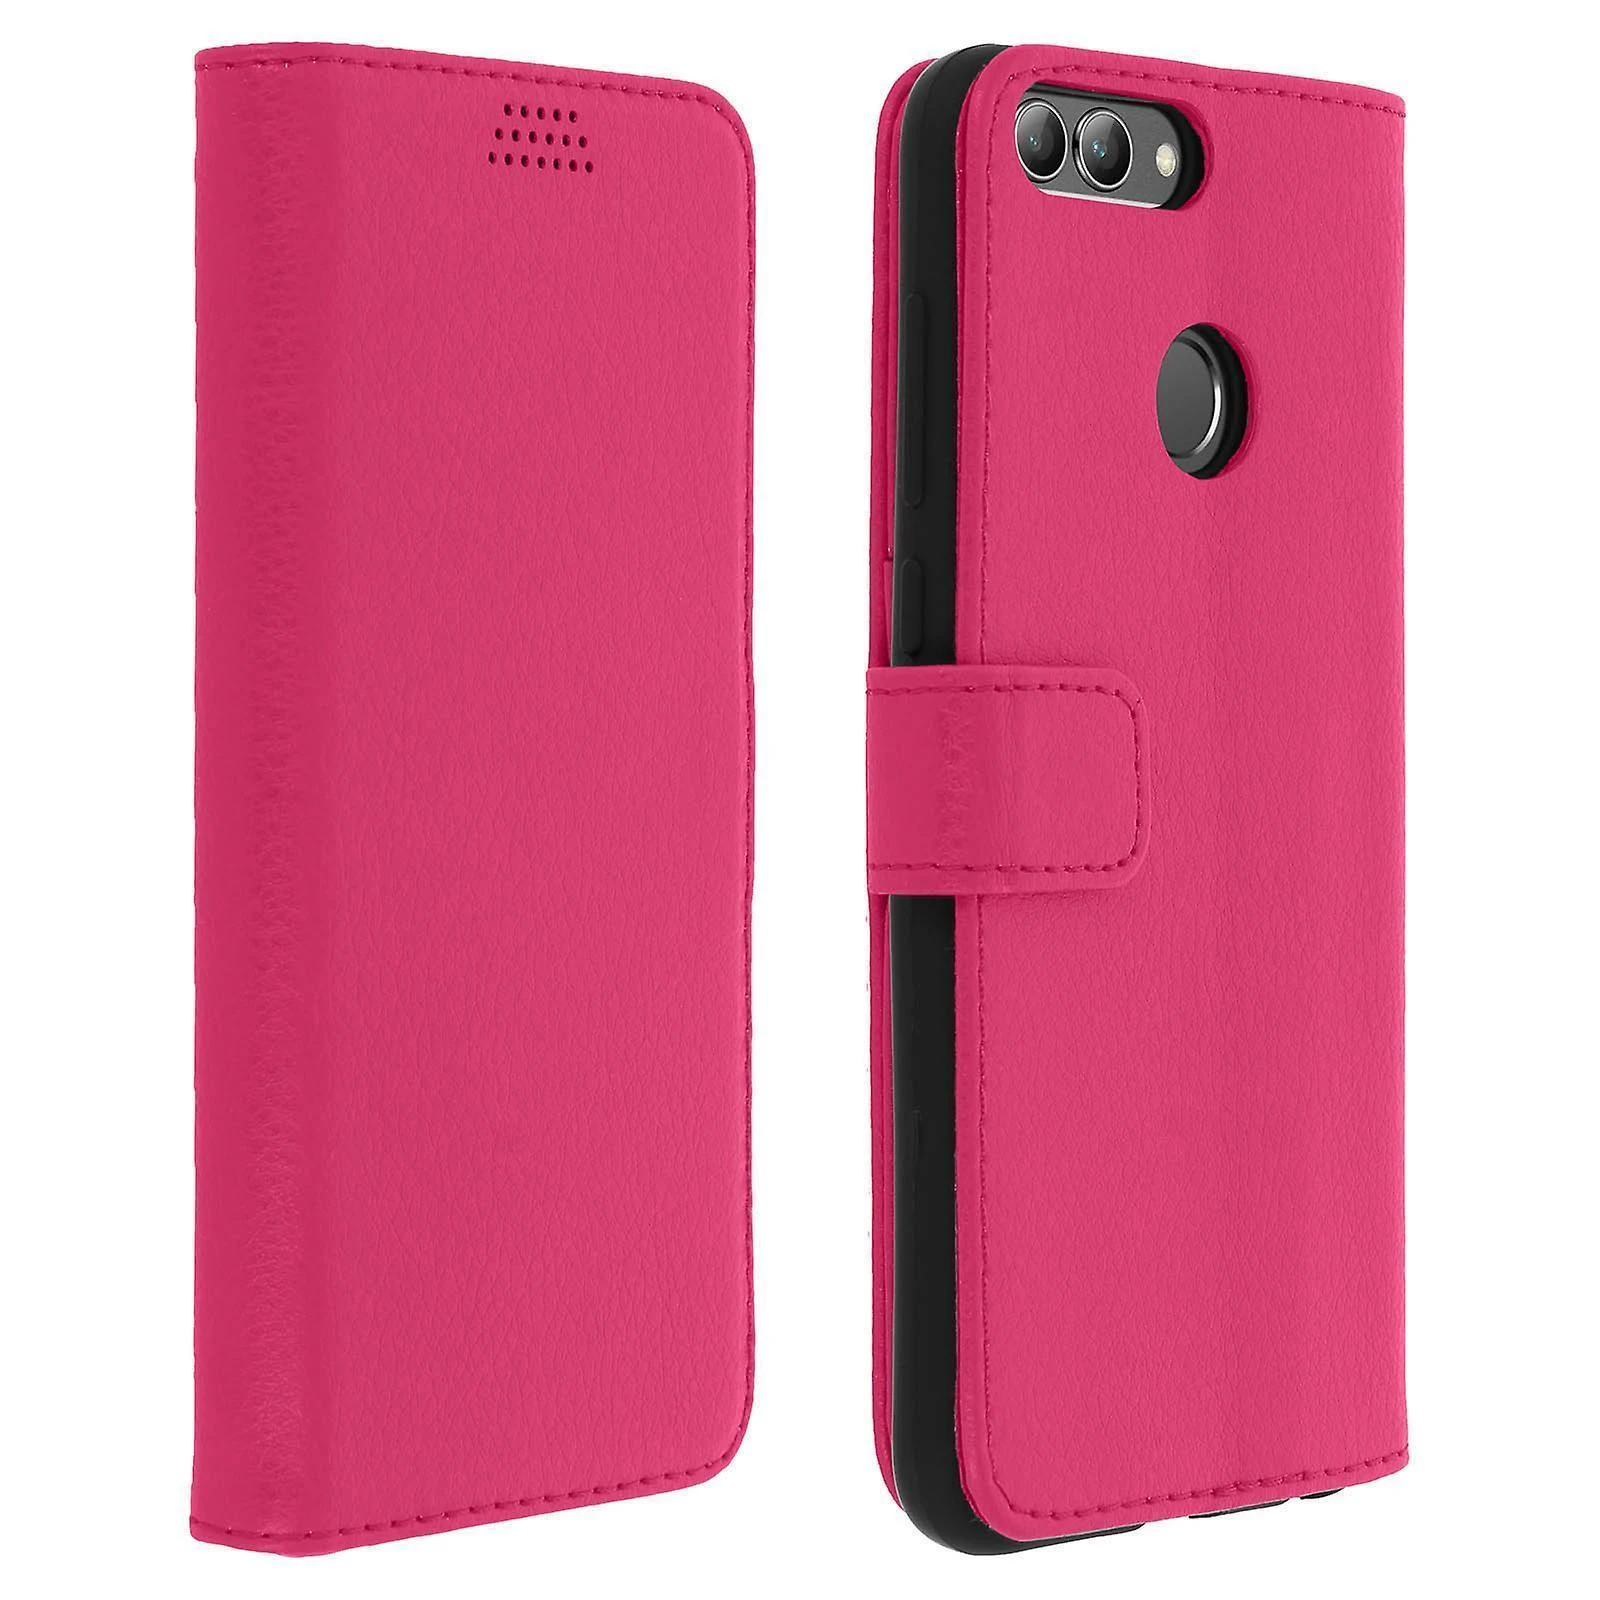 HUAWEI HONOR 10 BOOK CASE PINK